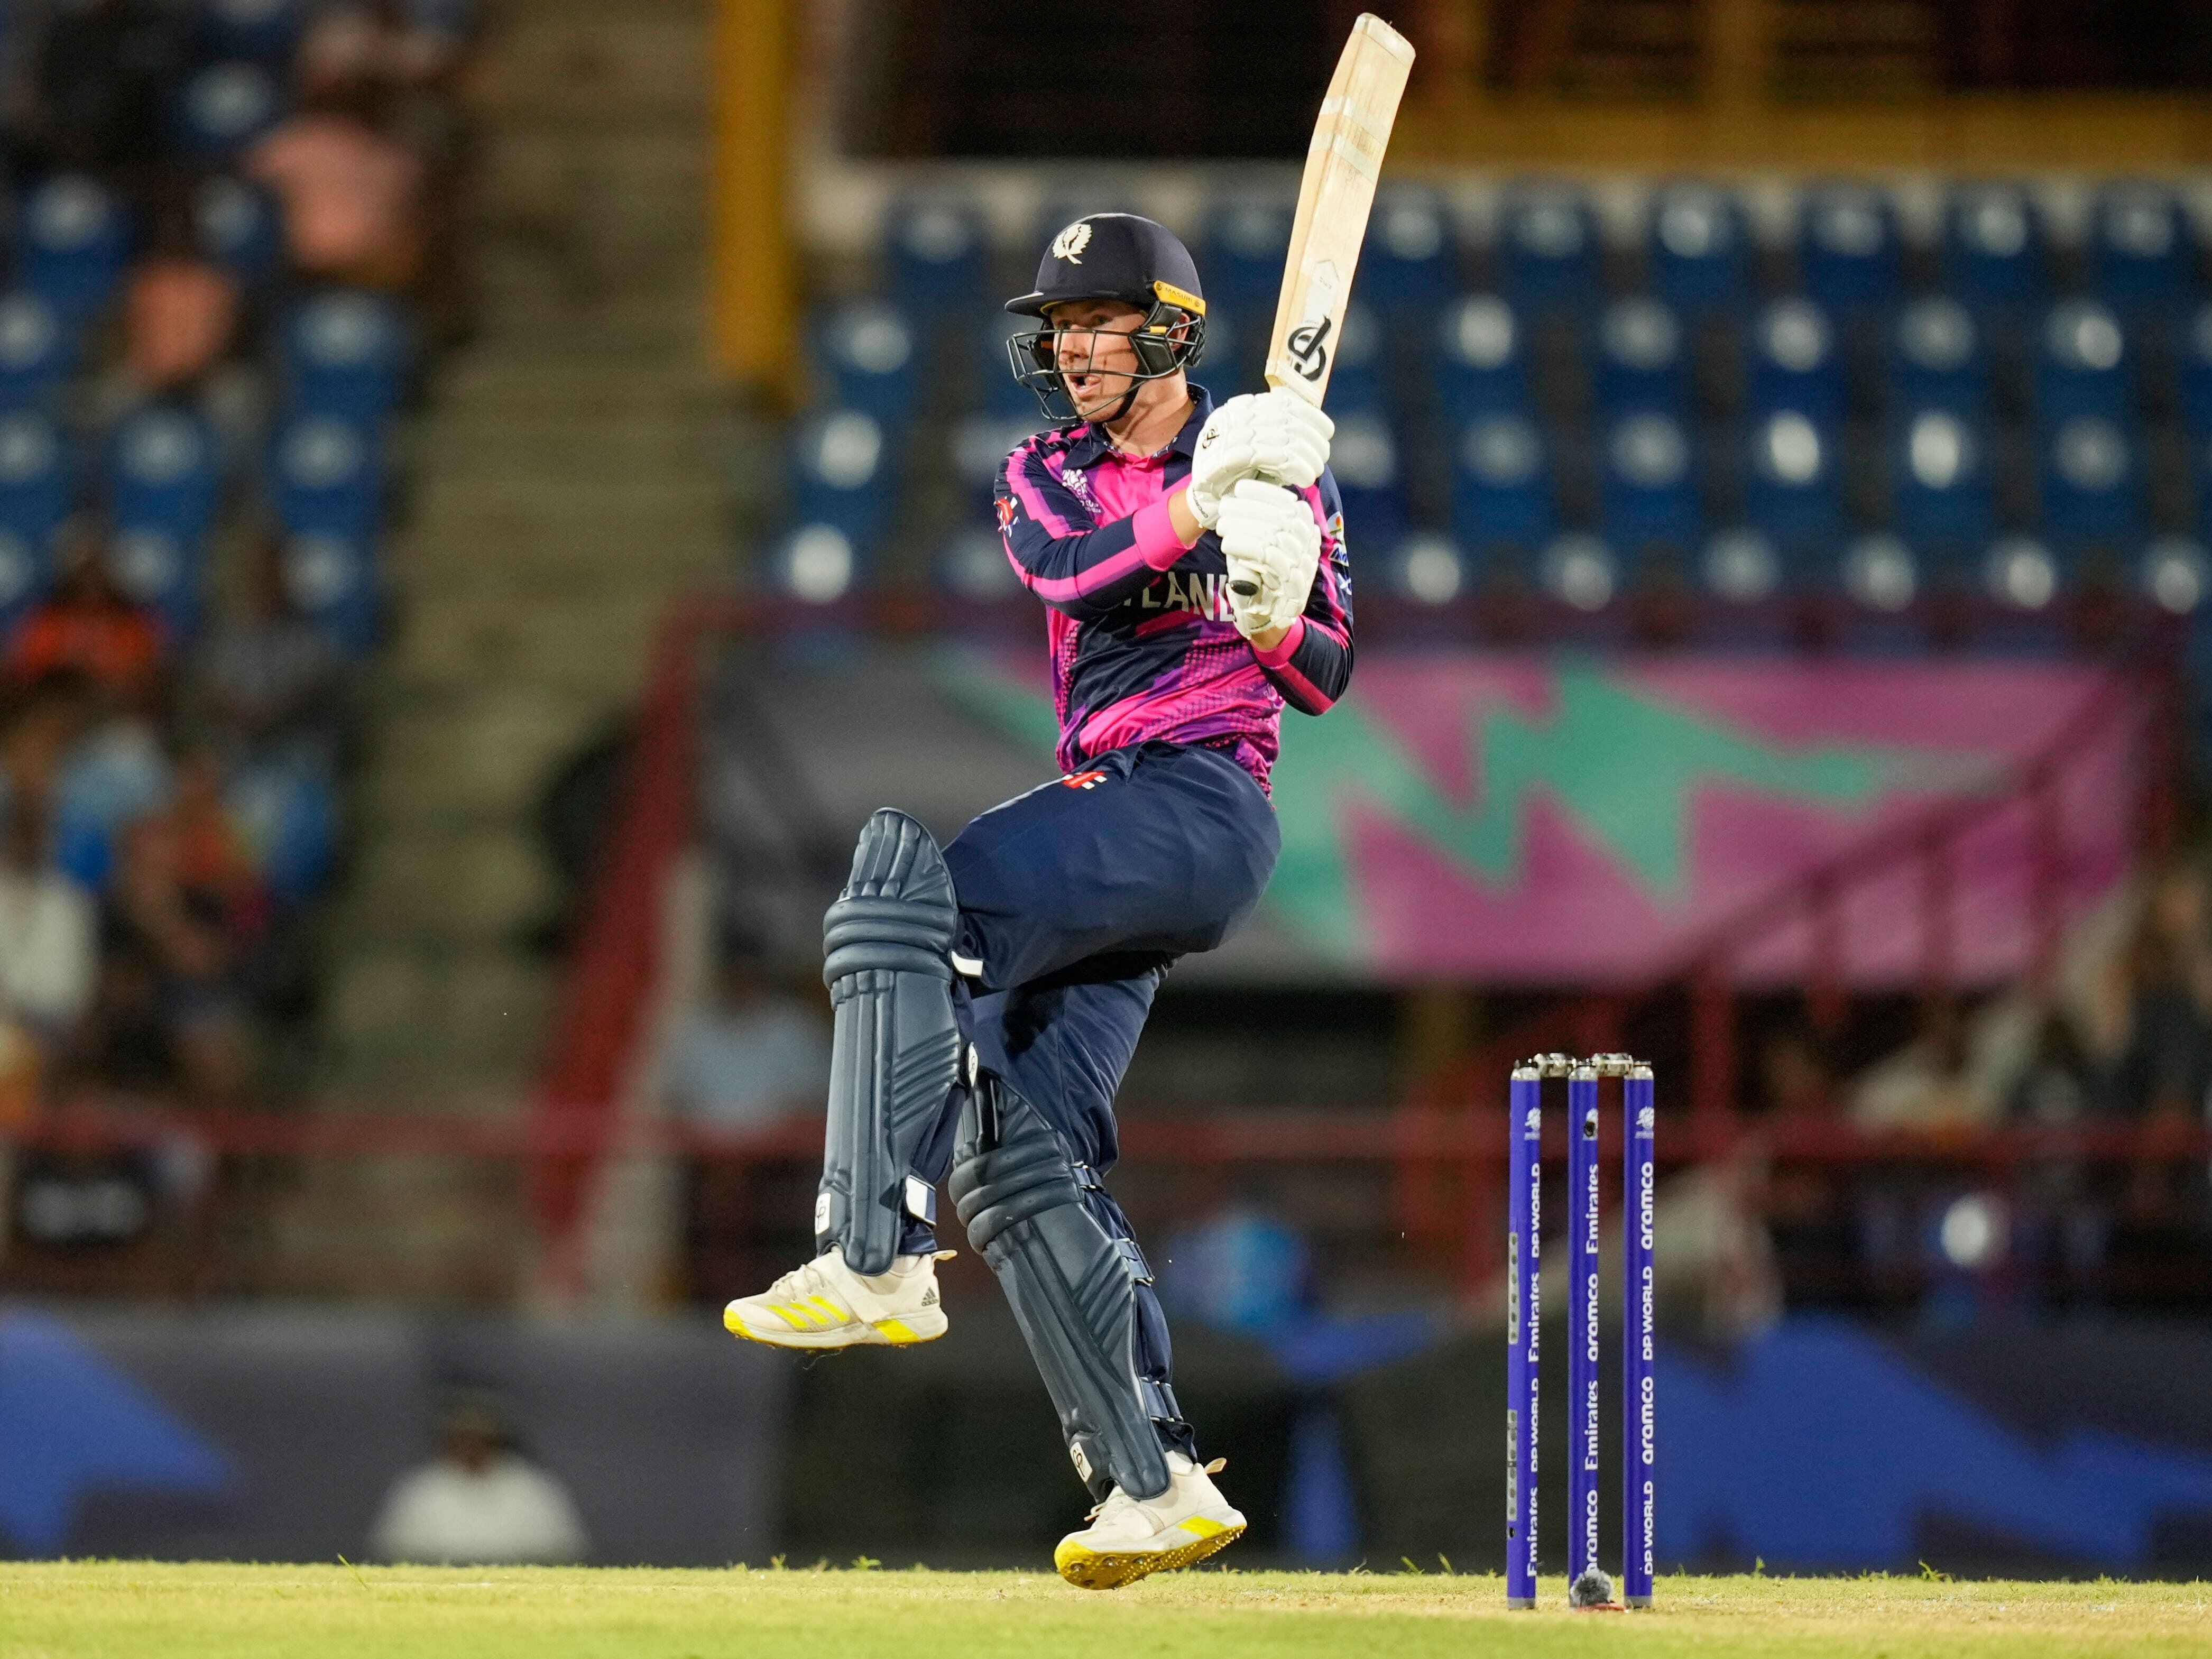 Brandon McMullen says Scotland will be ‘back stronger’ after T20 World Cup exit